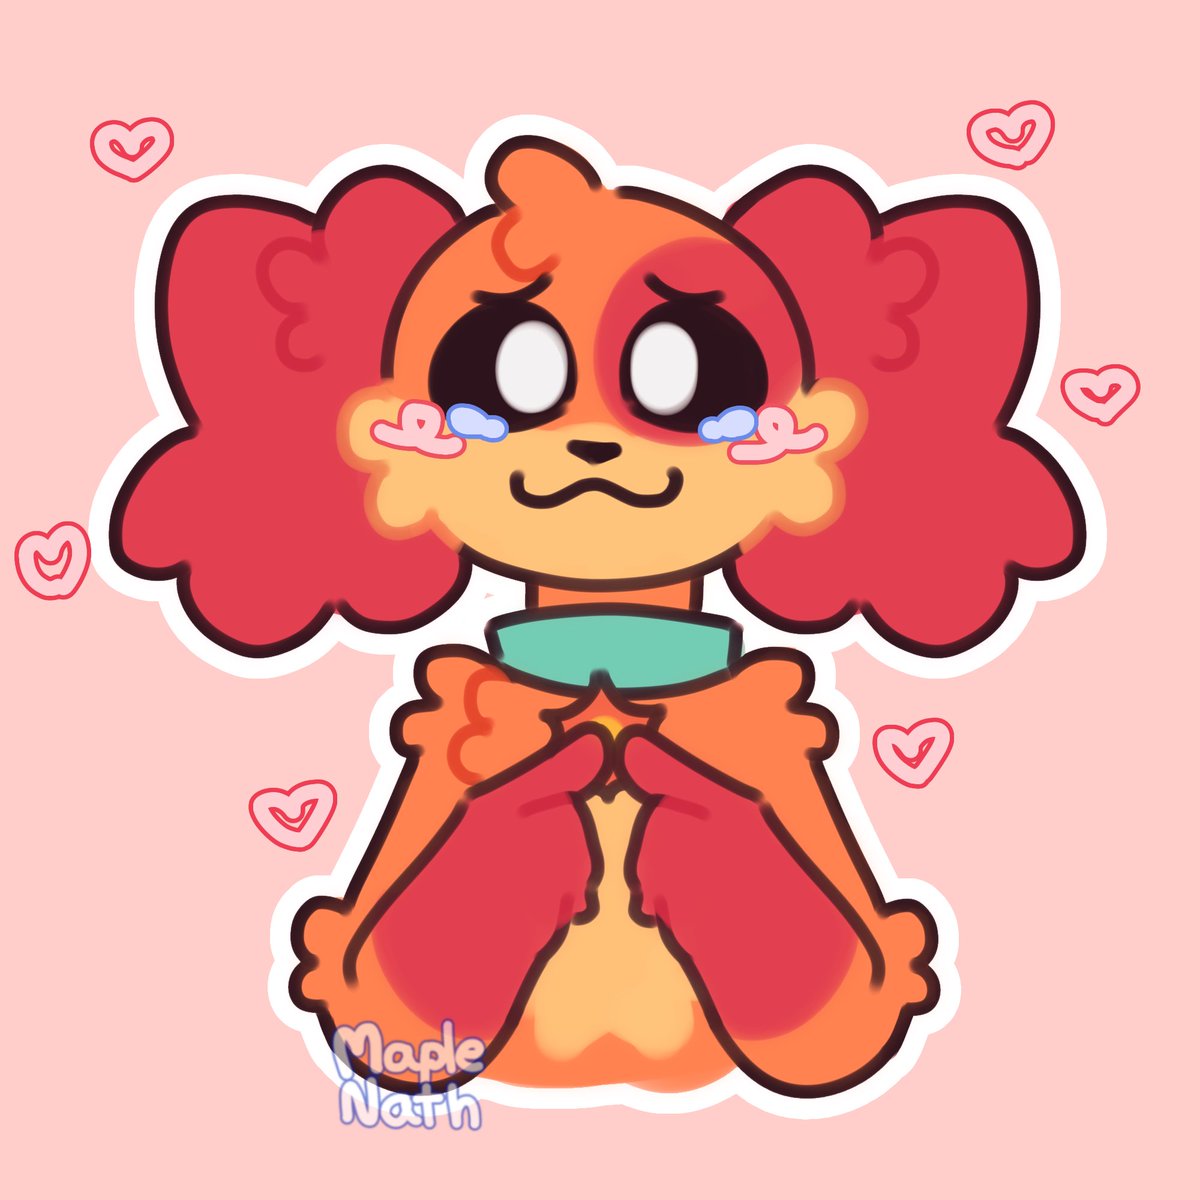 +200 PEOPLE FOLLOW ME ALREADY⁉️HELLO🥹?? THANK YOU ALL SO MUCH OMG HAVE A QUICK DOGDAY DOODLE, I LOVE YALL 💗😭
#dogday #PoppyPlaytime #PoppyPlaytime3 #SmilingCritters